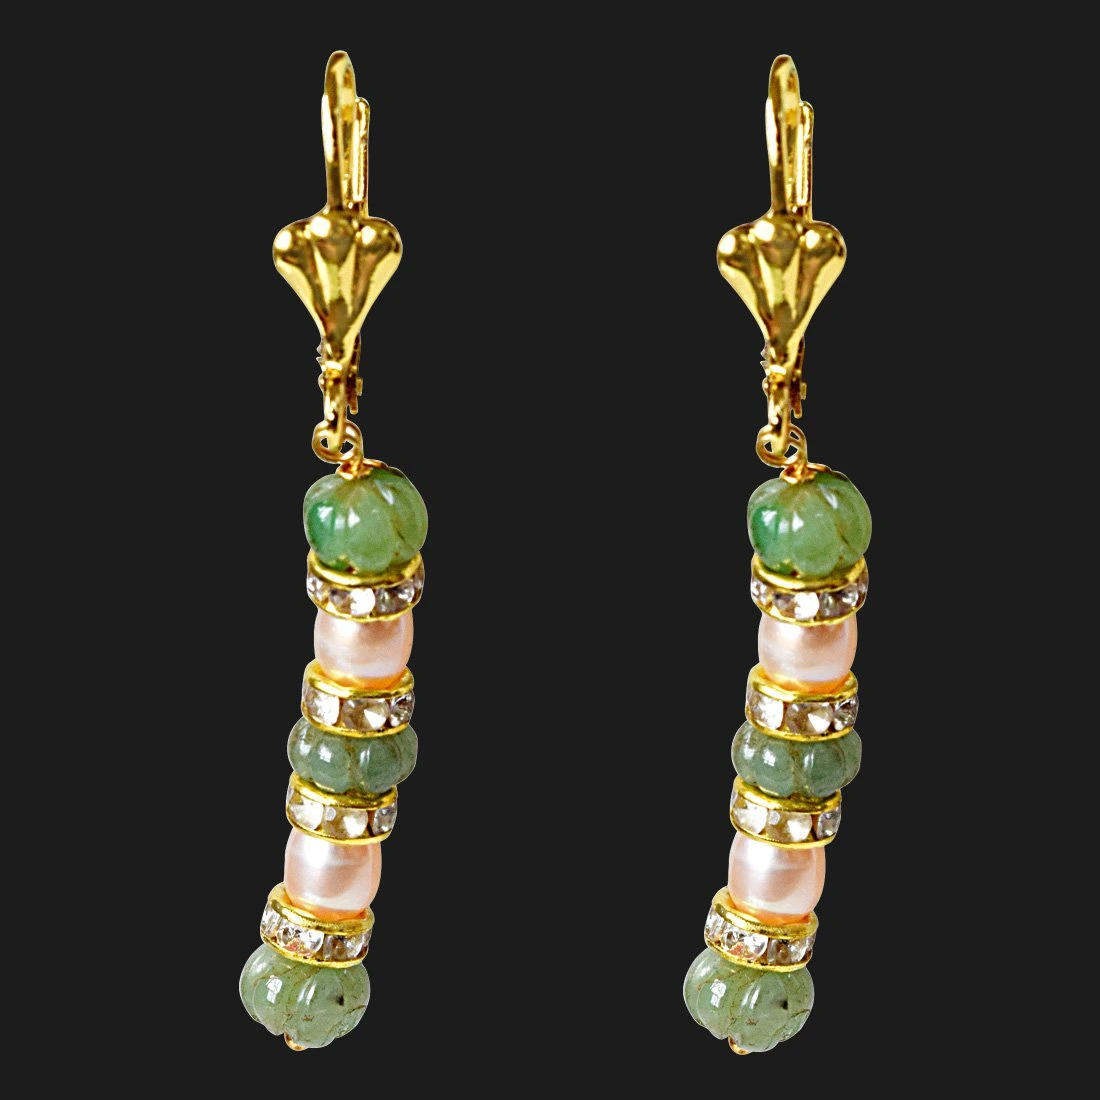 Real Green Engraved Emerald Beads and Peach Freshwater Pearl Hanging Earrings for Women (SE332)